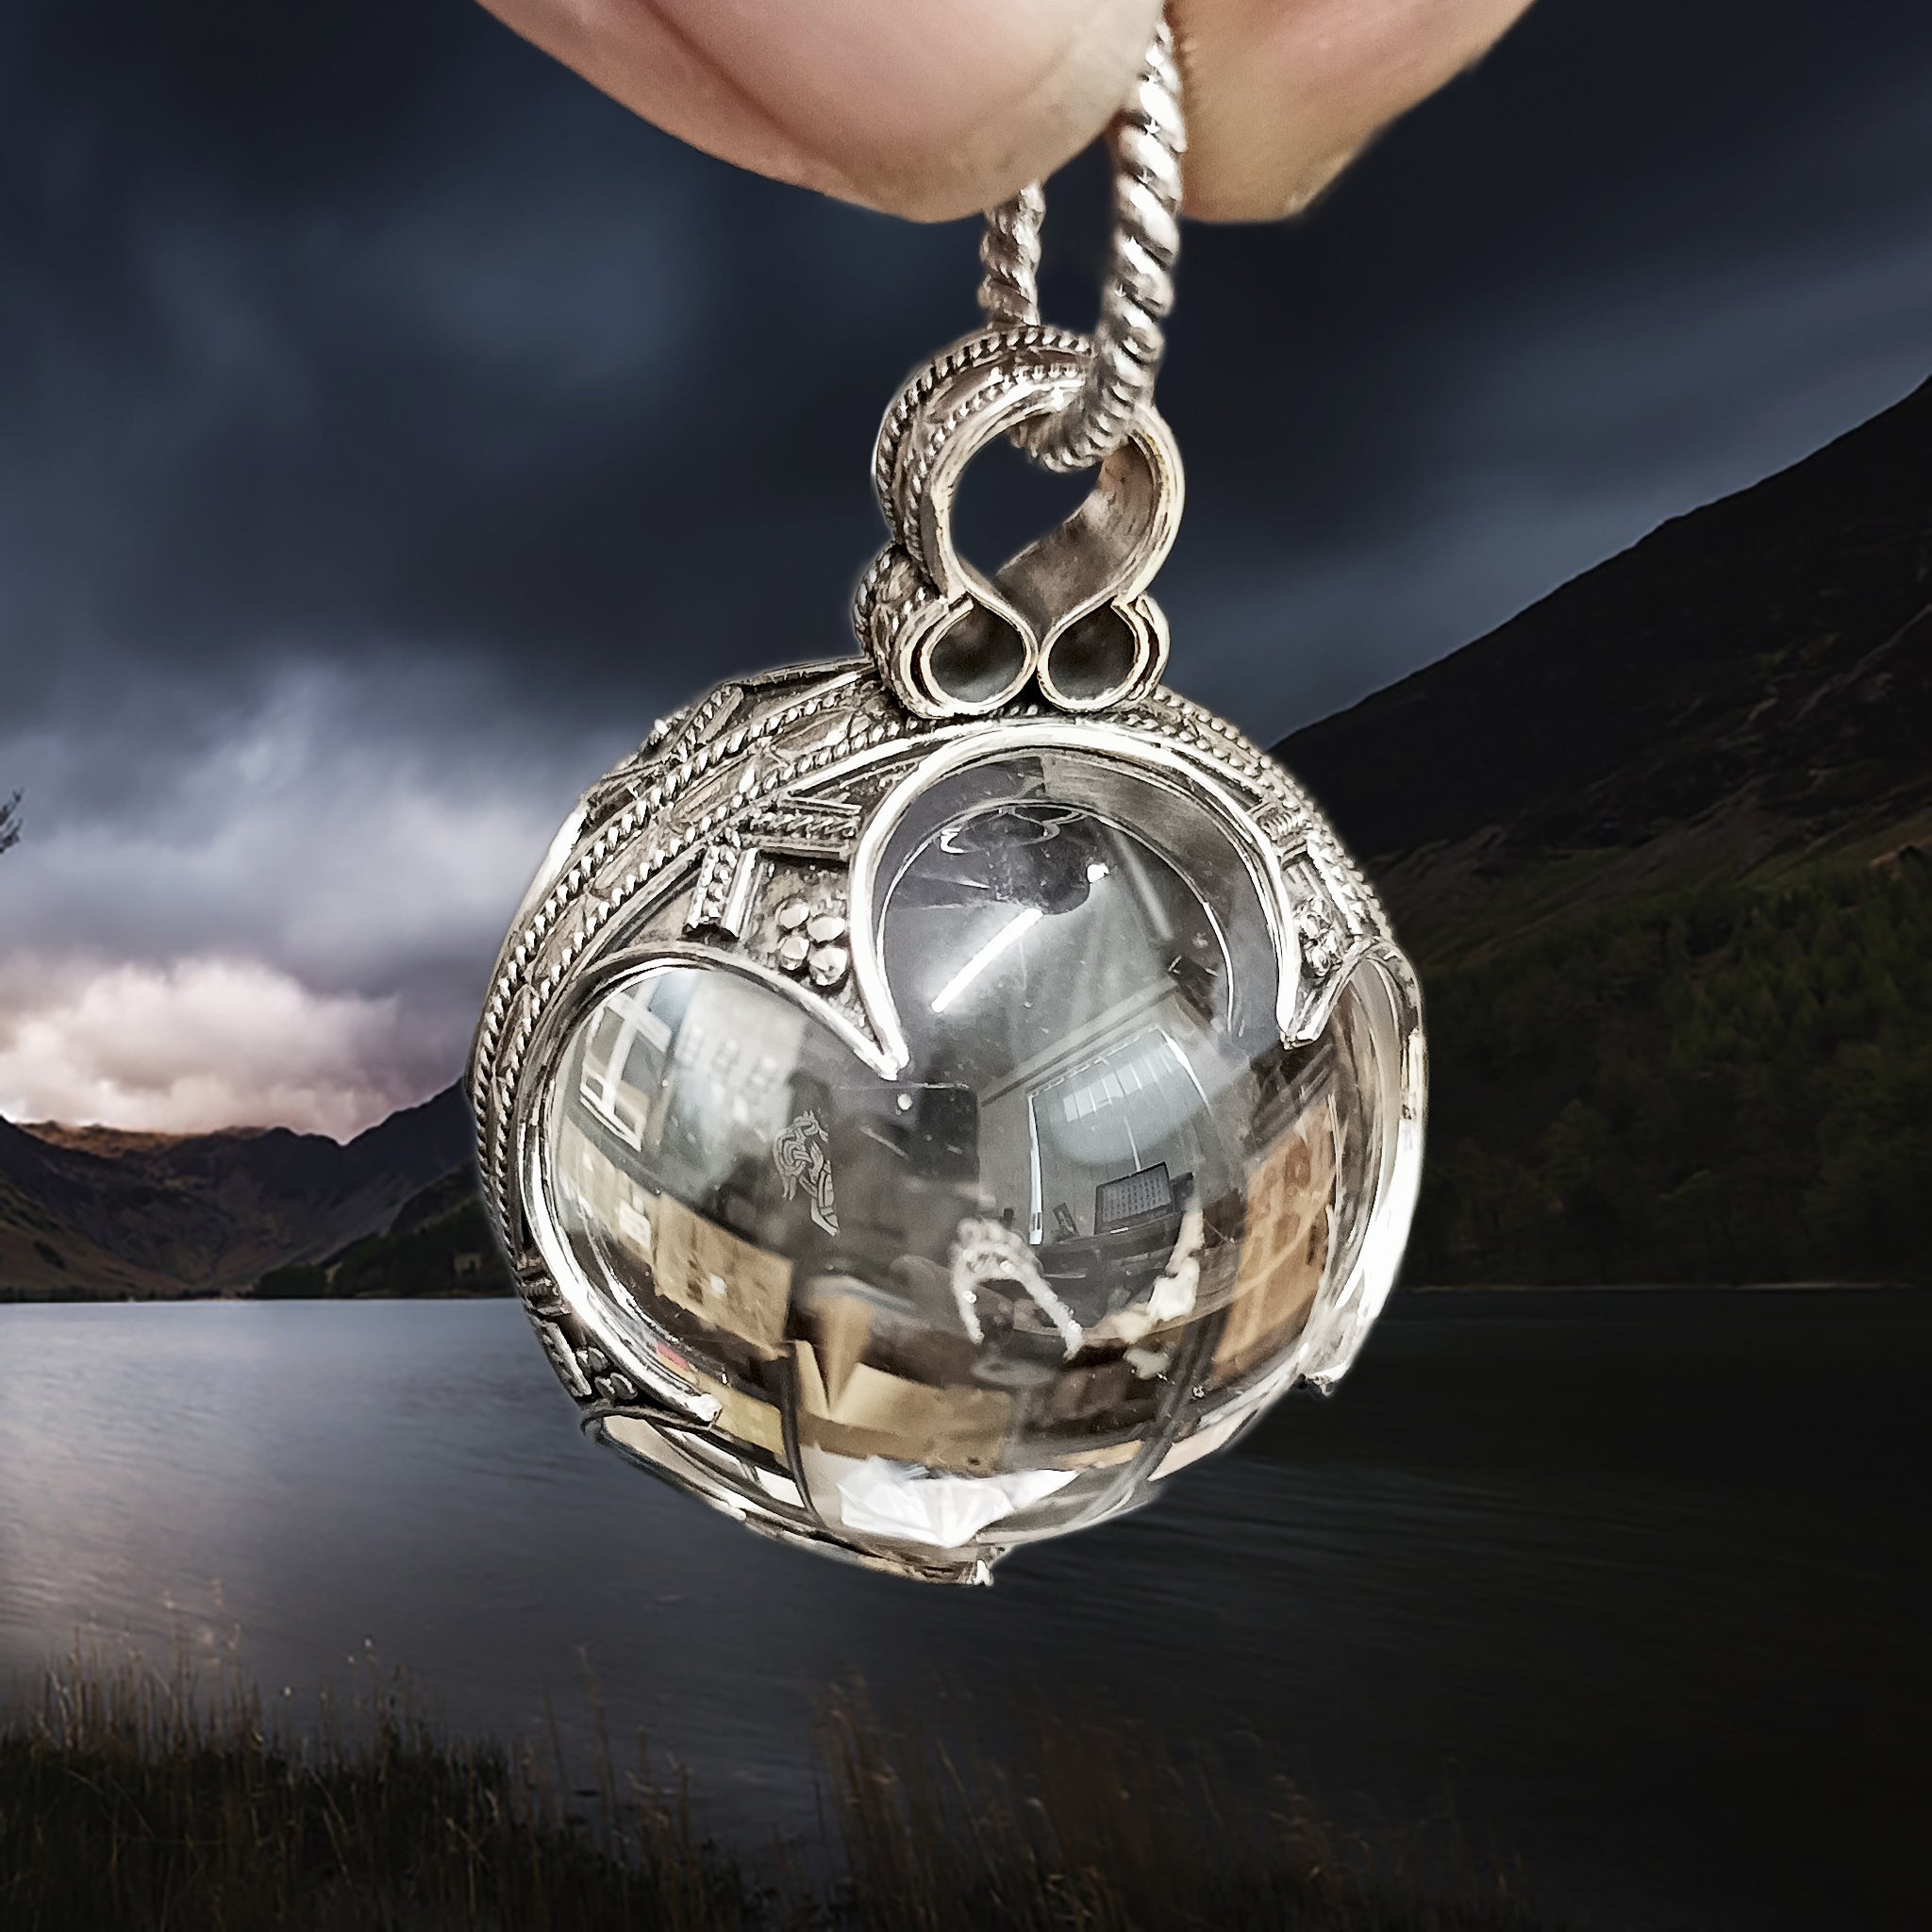 Large Silver Gotland Crystal Ball Pendant in Fimgers - Angle View